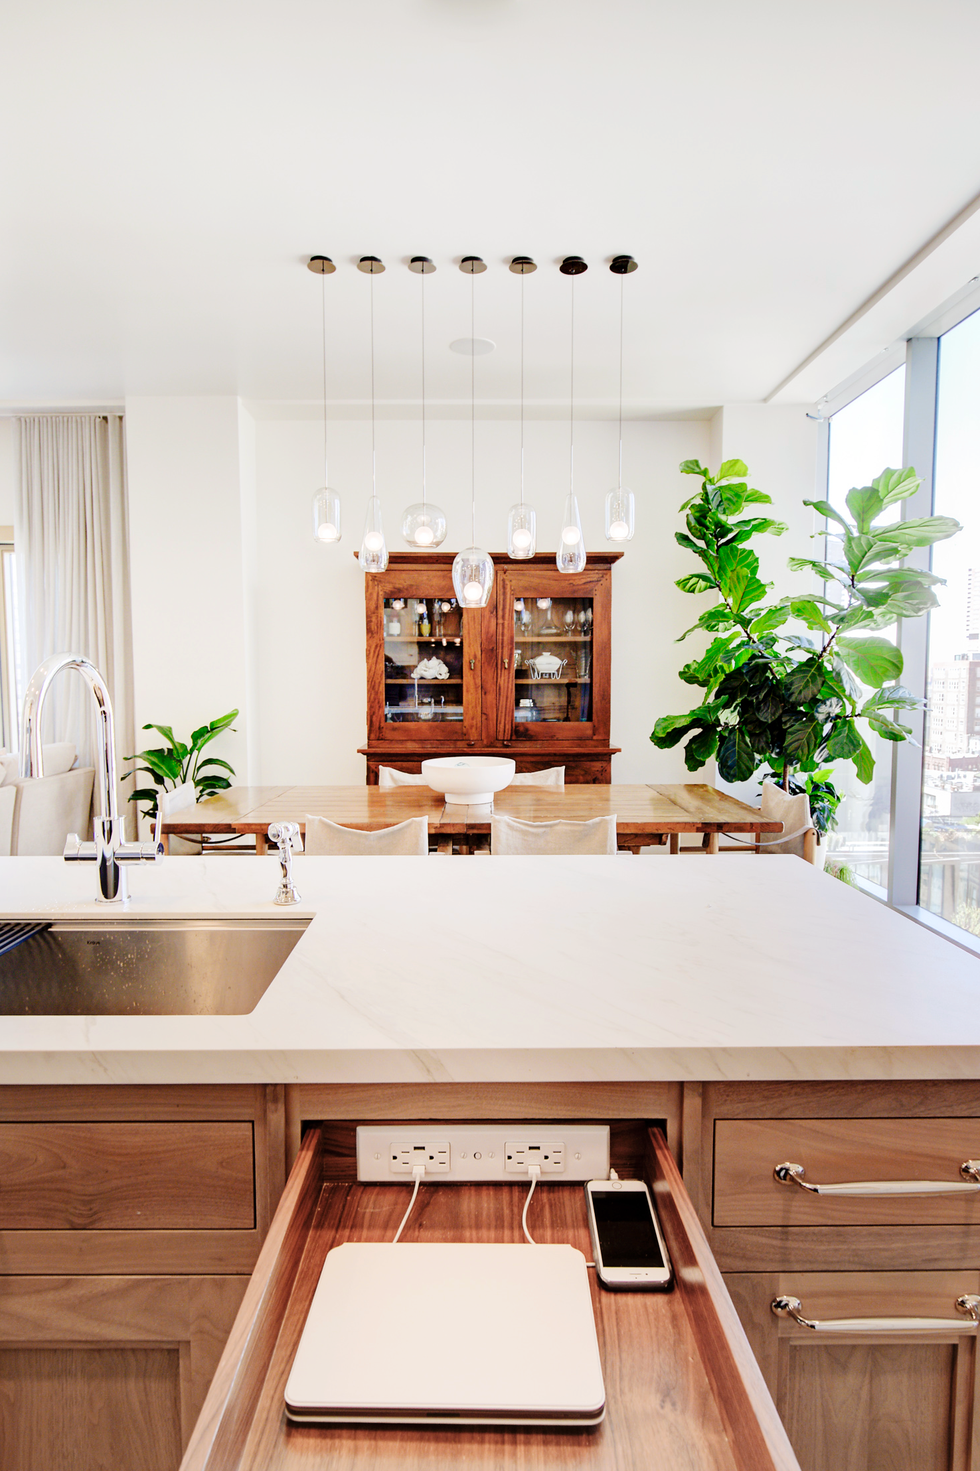 13 Space-Making Hacks for Small Kitchens